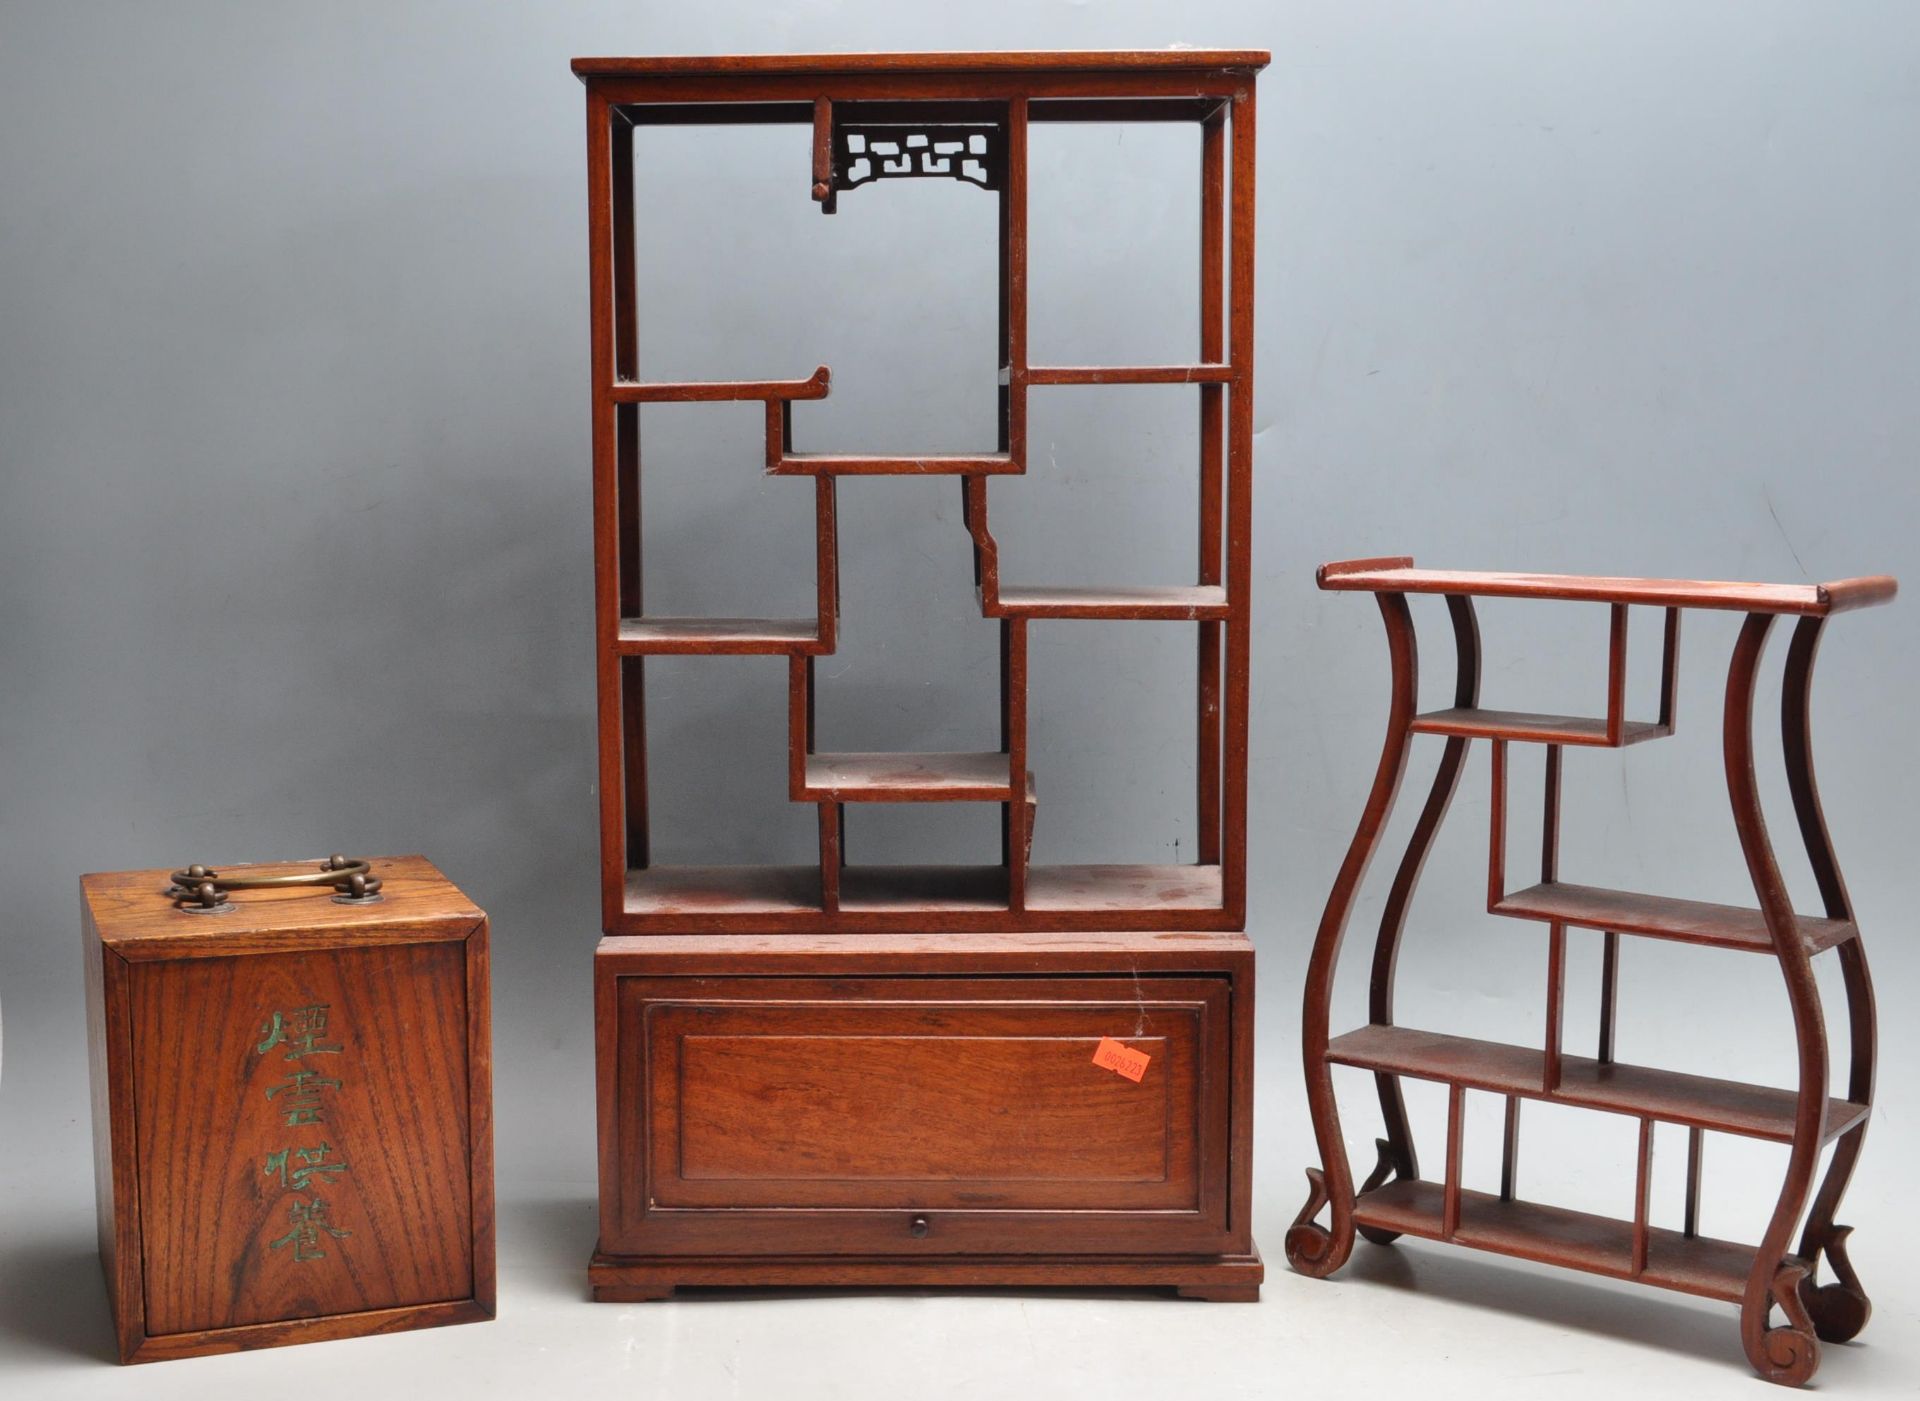 COLLECTION OF THREE CHINESE HARDWOOD PORCELAIN VITRINES